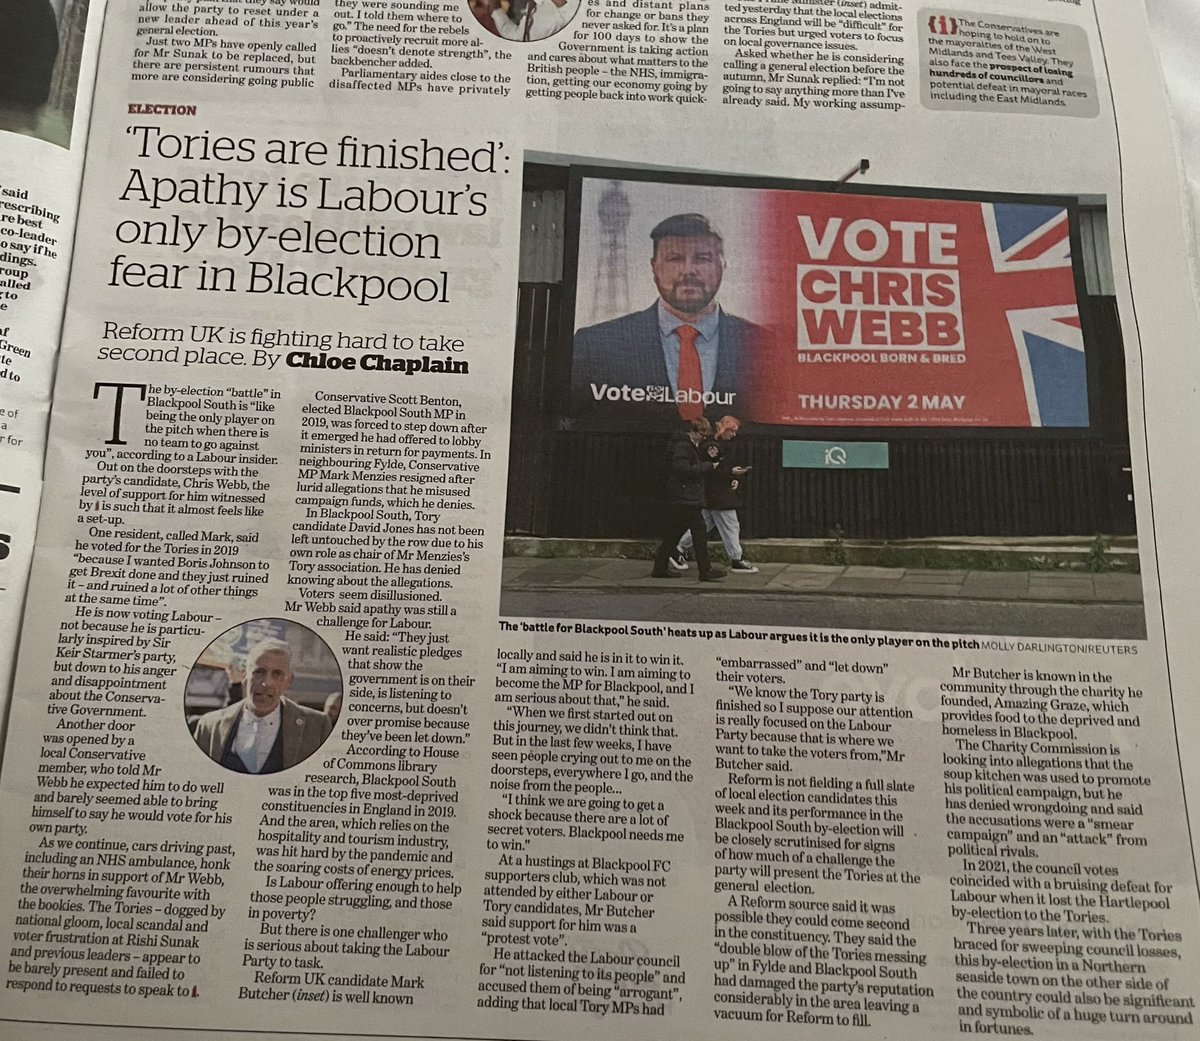 “The Tories are finished’: Apathy is Labour’s only by-election fear in Blackpool.” It’s important come a General Election we get more people voting in Blackpool. We have far too many health inequalities and social issues for people not to vote! inews.co.uk/news/politics/…